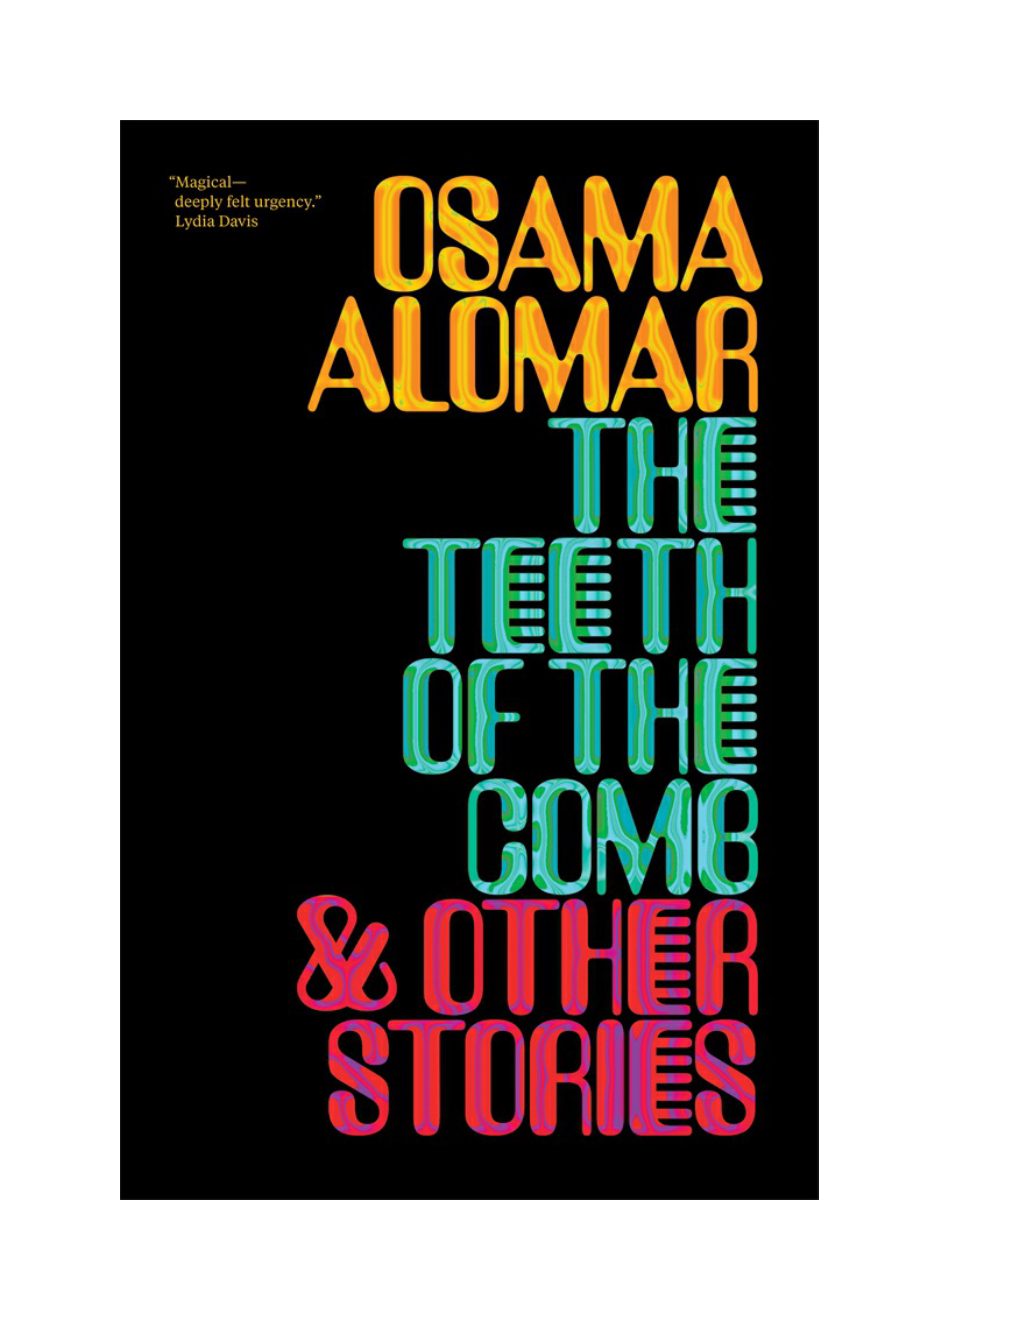 The Teeth of the Comb ALSO by OSAMA ALOMAR from New Directions